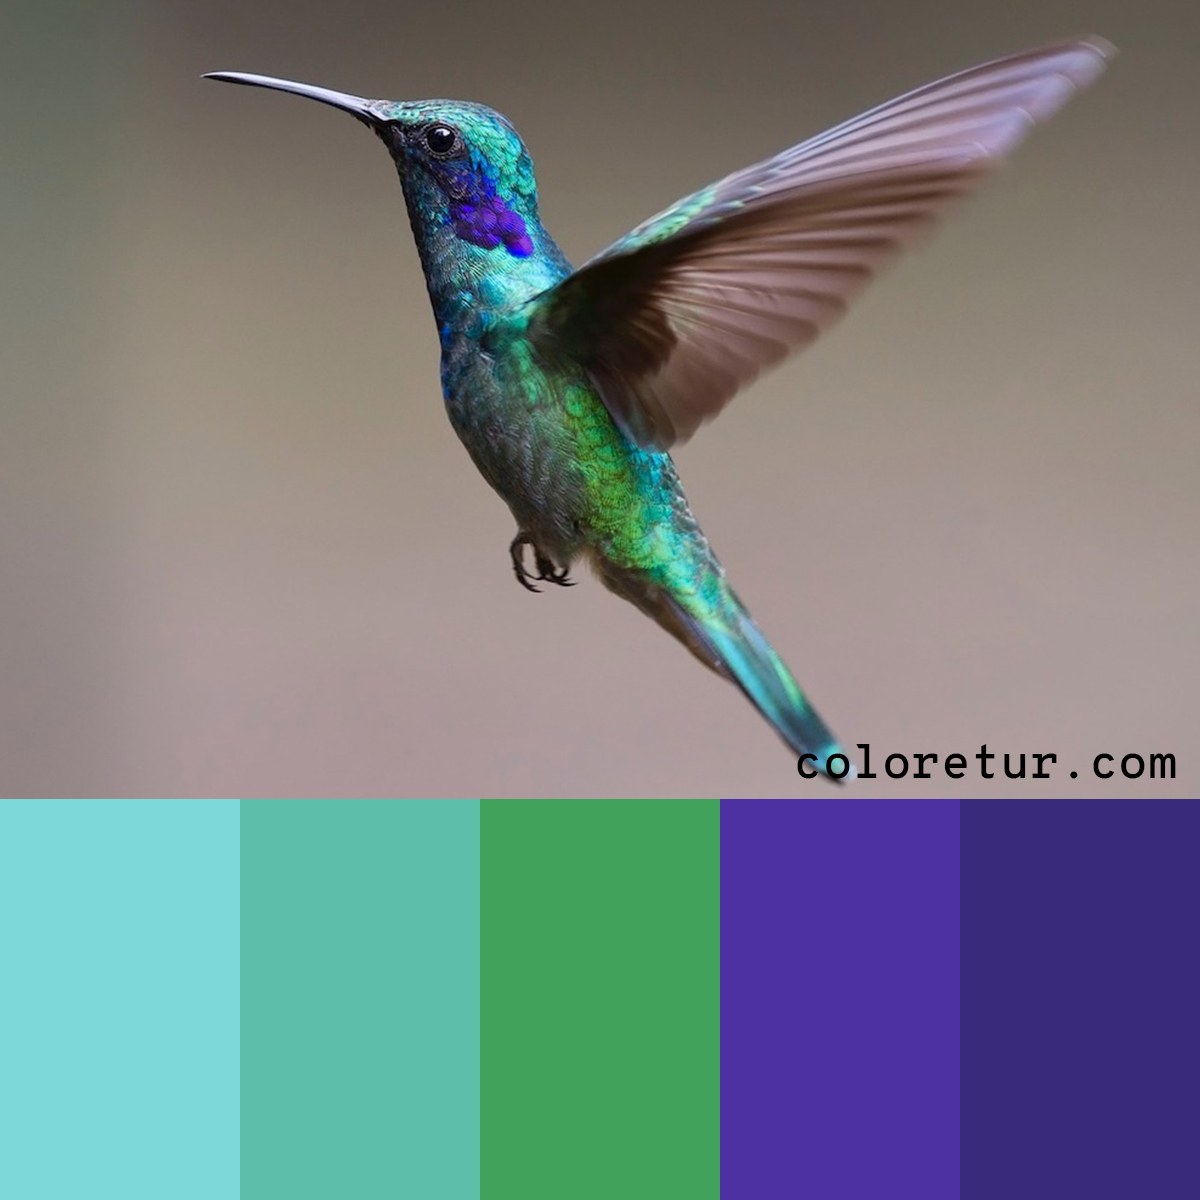 A bright, iridescent palette from the vibrant wings of a hummingbird.